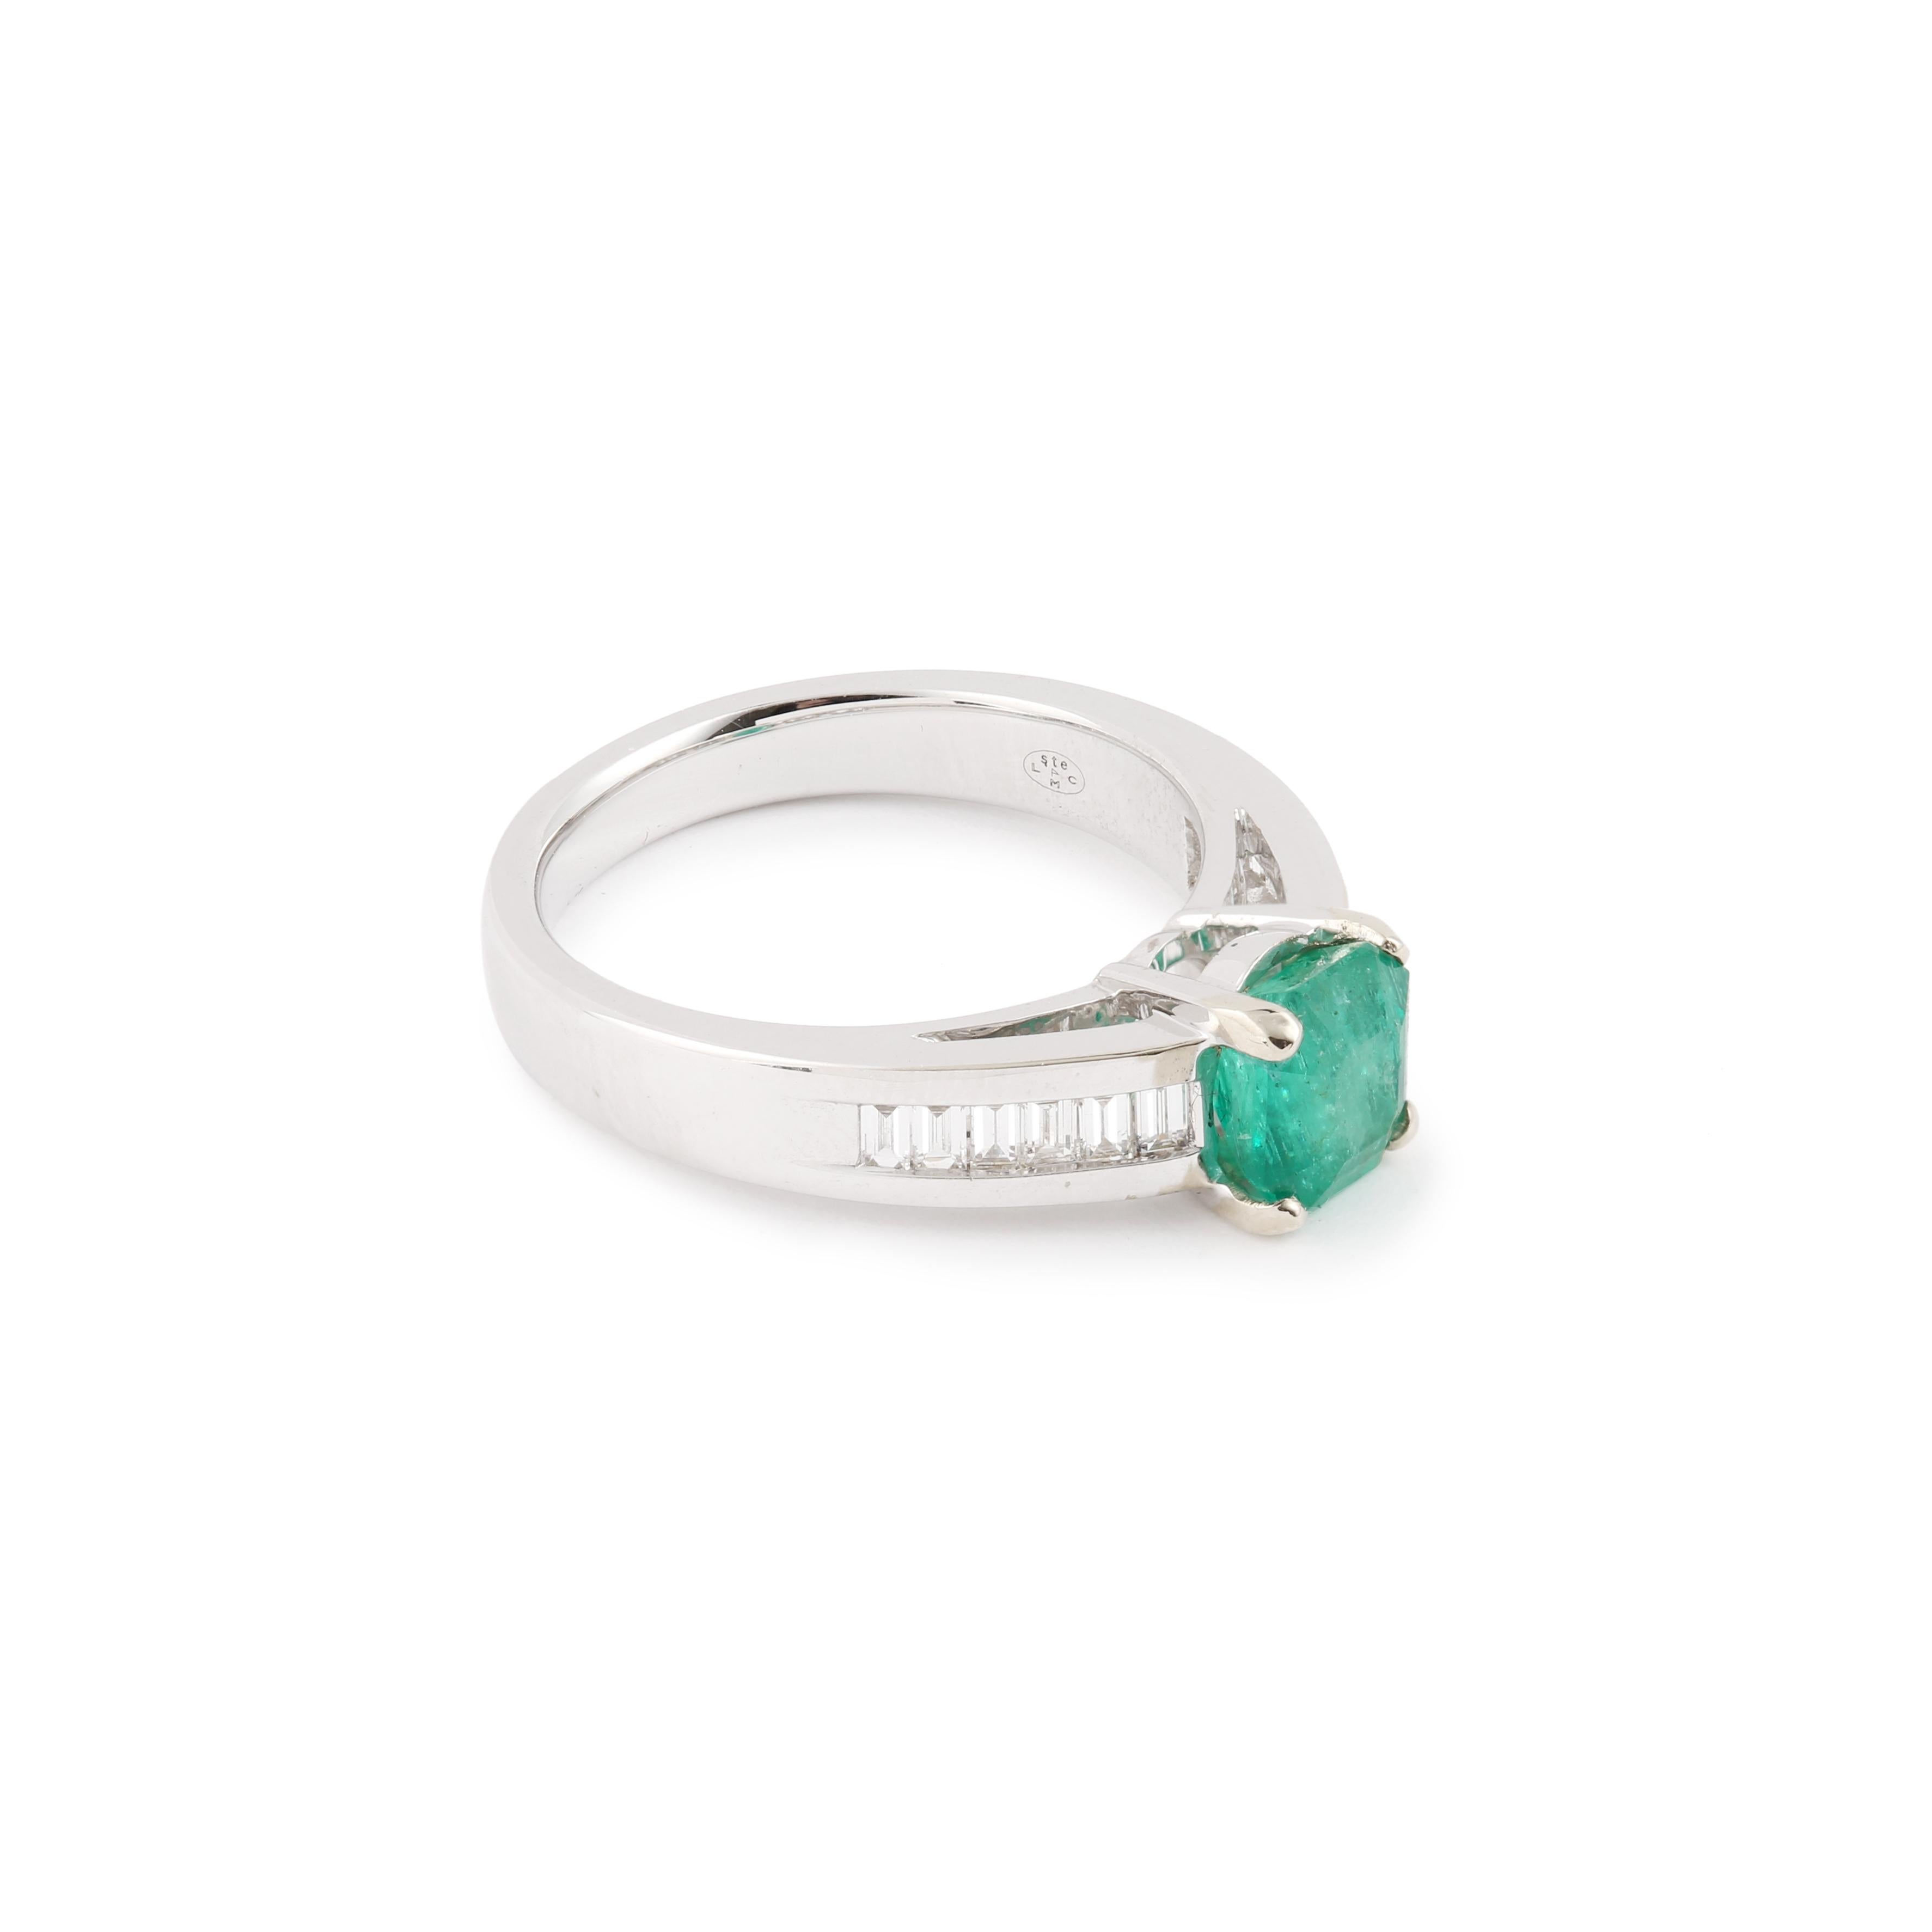 White gold ring centred on a square cut emerald set with baguette-cut diamonds.

Emerald weight: 1.35 carats

With Gem Paris certificate, specifying natural emerald, moderate oil impregnation, Colombian origin.

Total diamond weight : 0.33